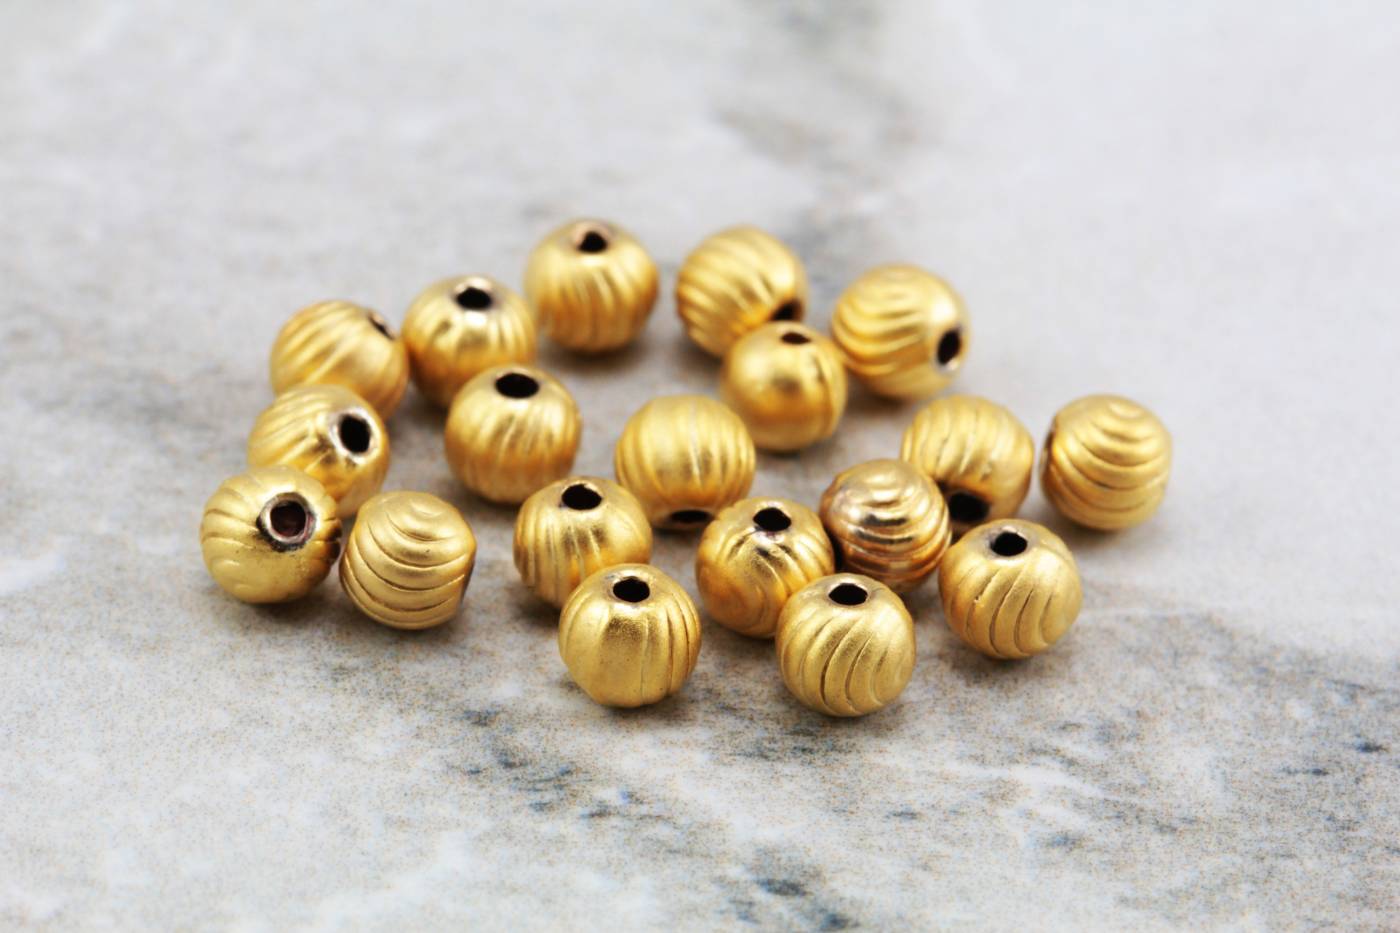 Metal Spacers - Gold Spacer Beads - Gold Spacers - Metal Beads - Spacer  Beads - 100pcs - 6x2mm - (1729)